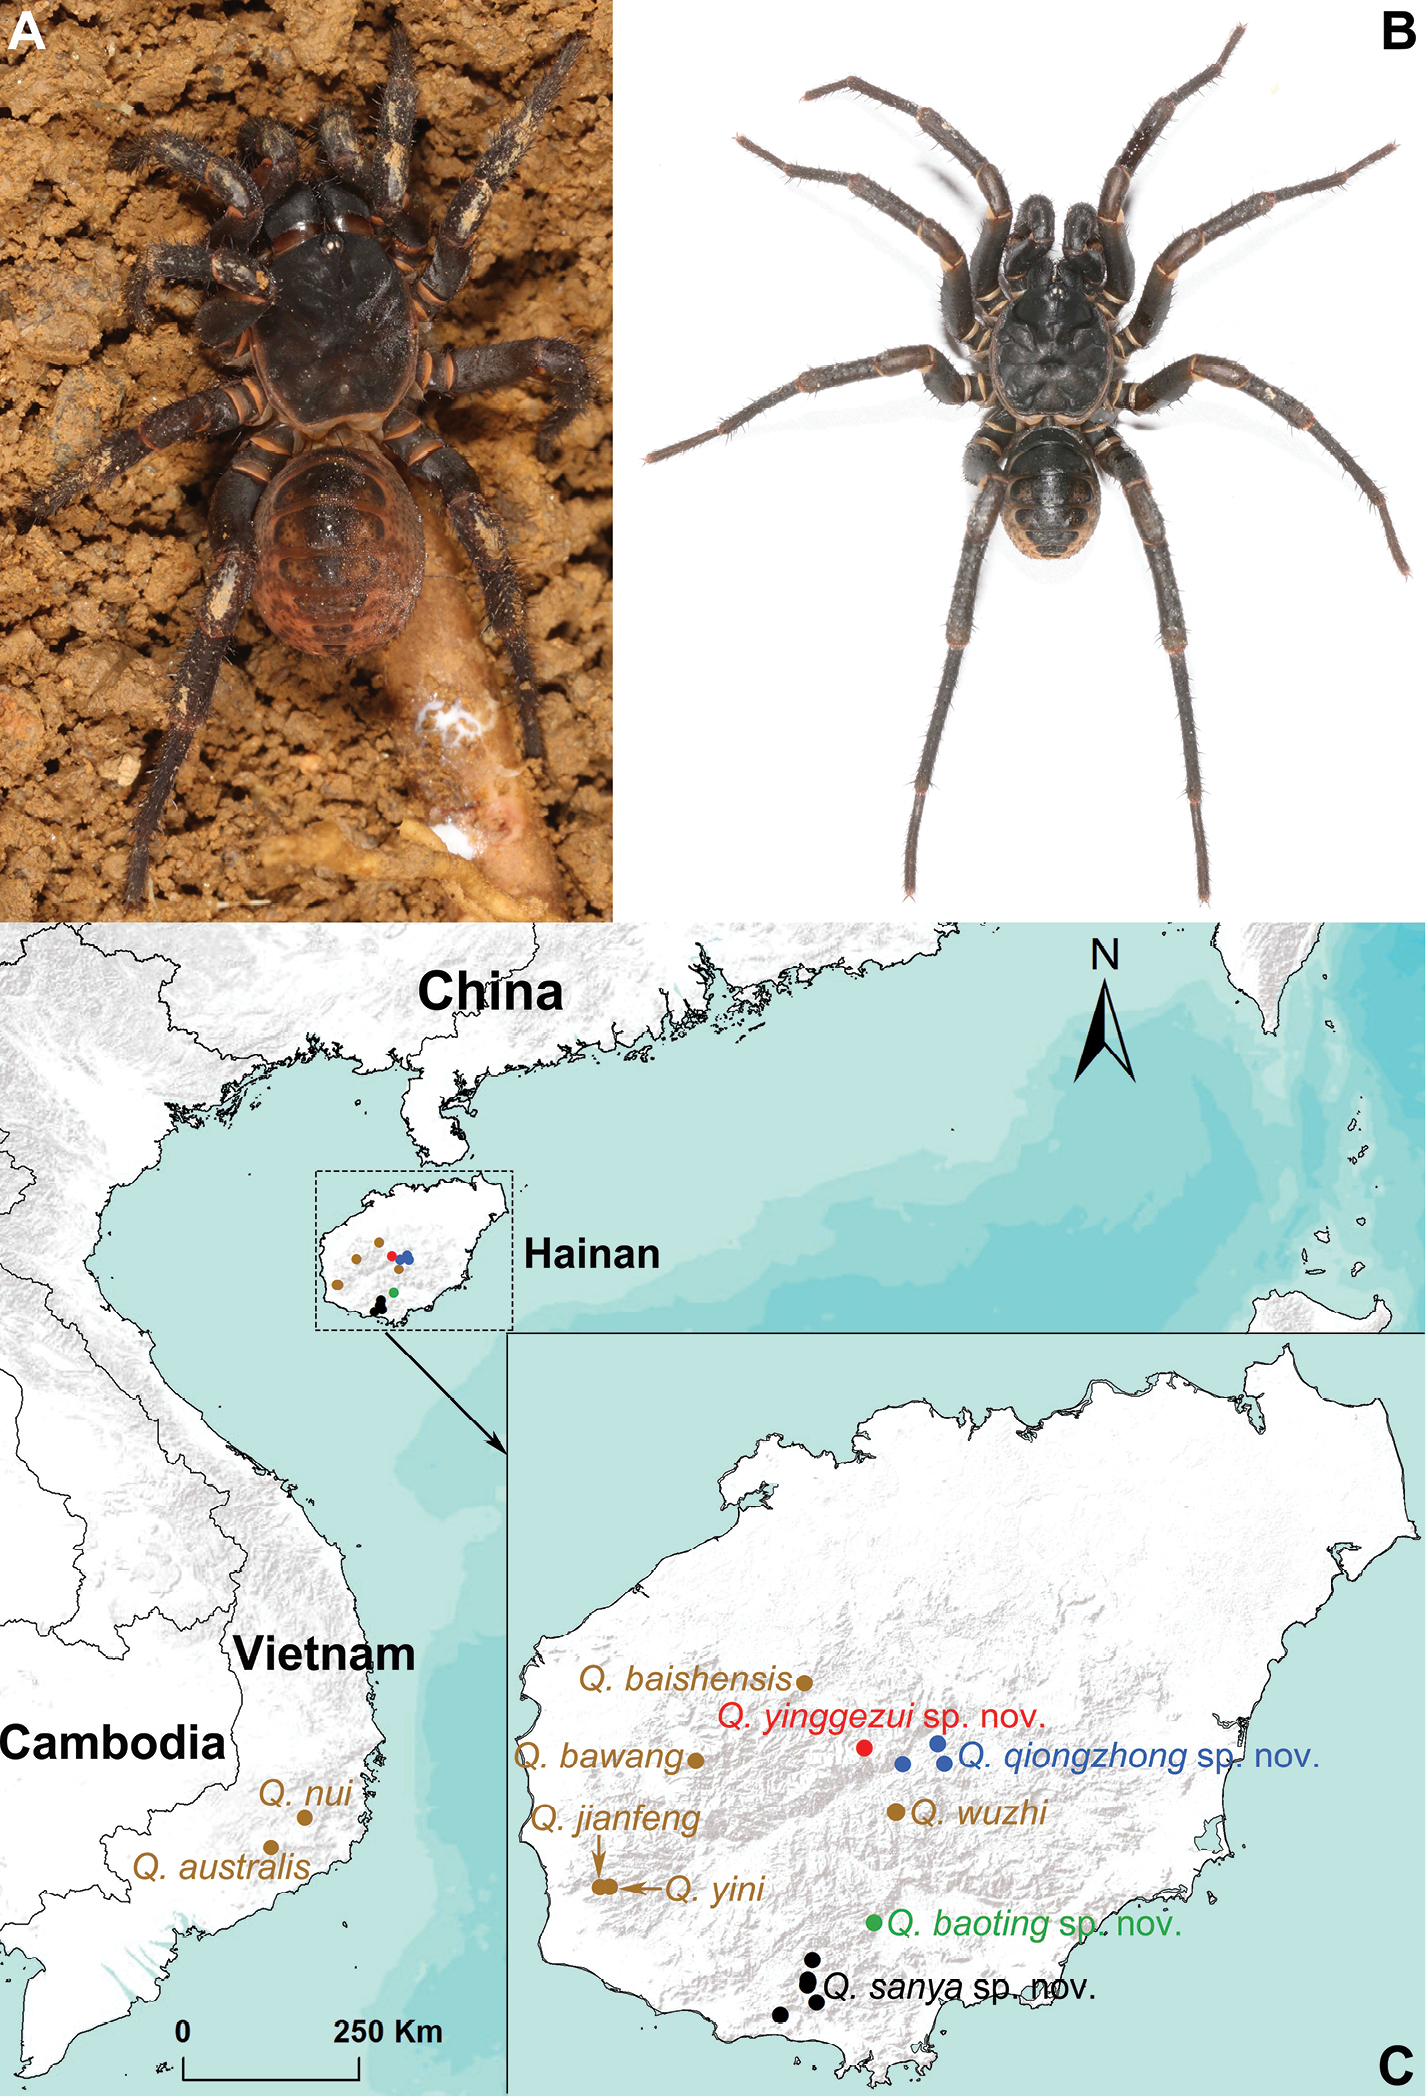 Three new species of mesothelean spiders discovered in China